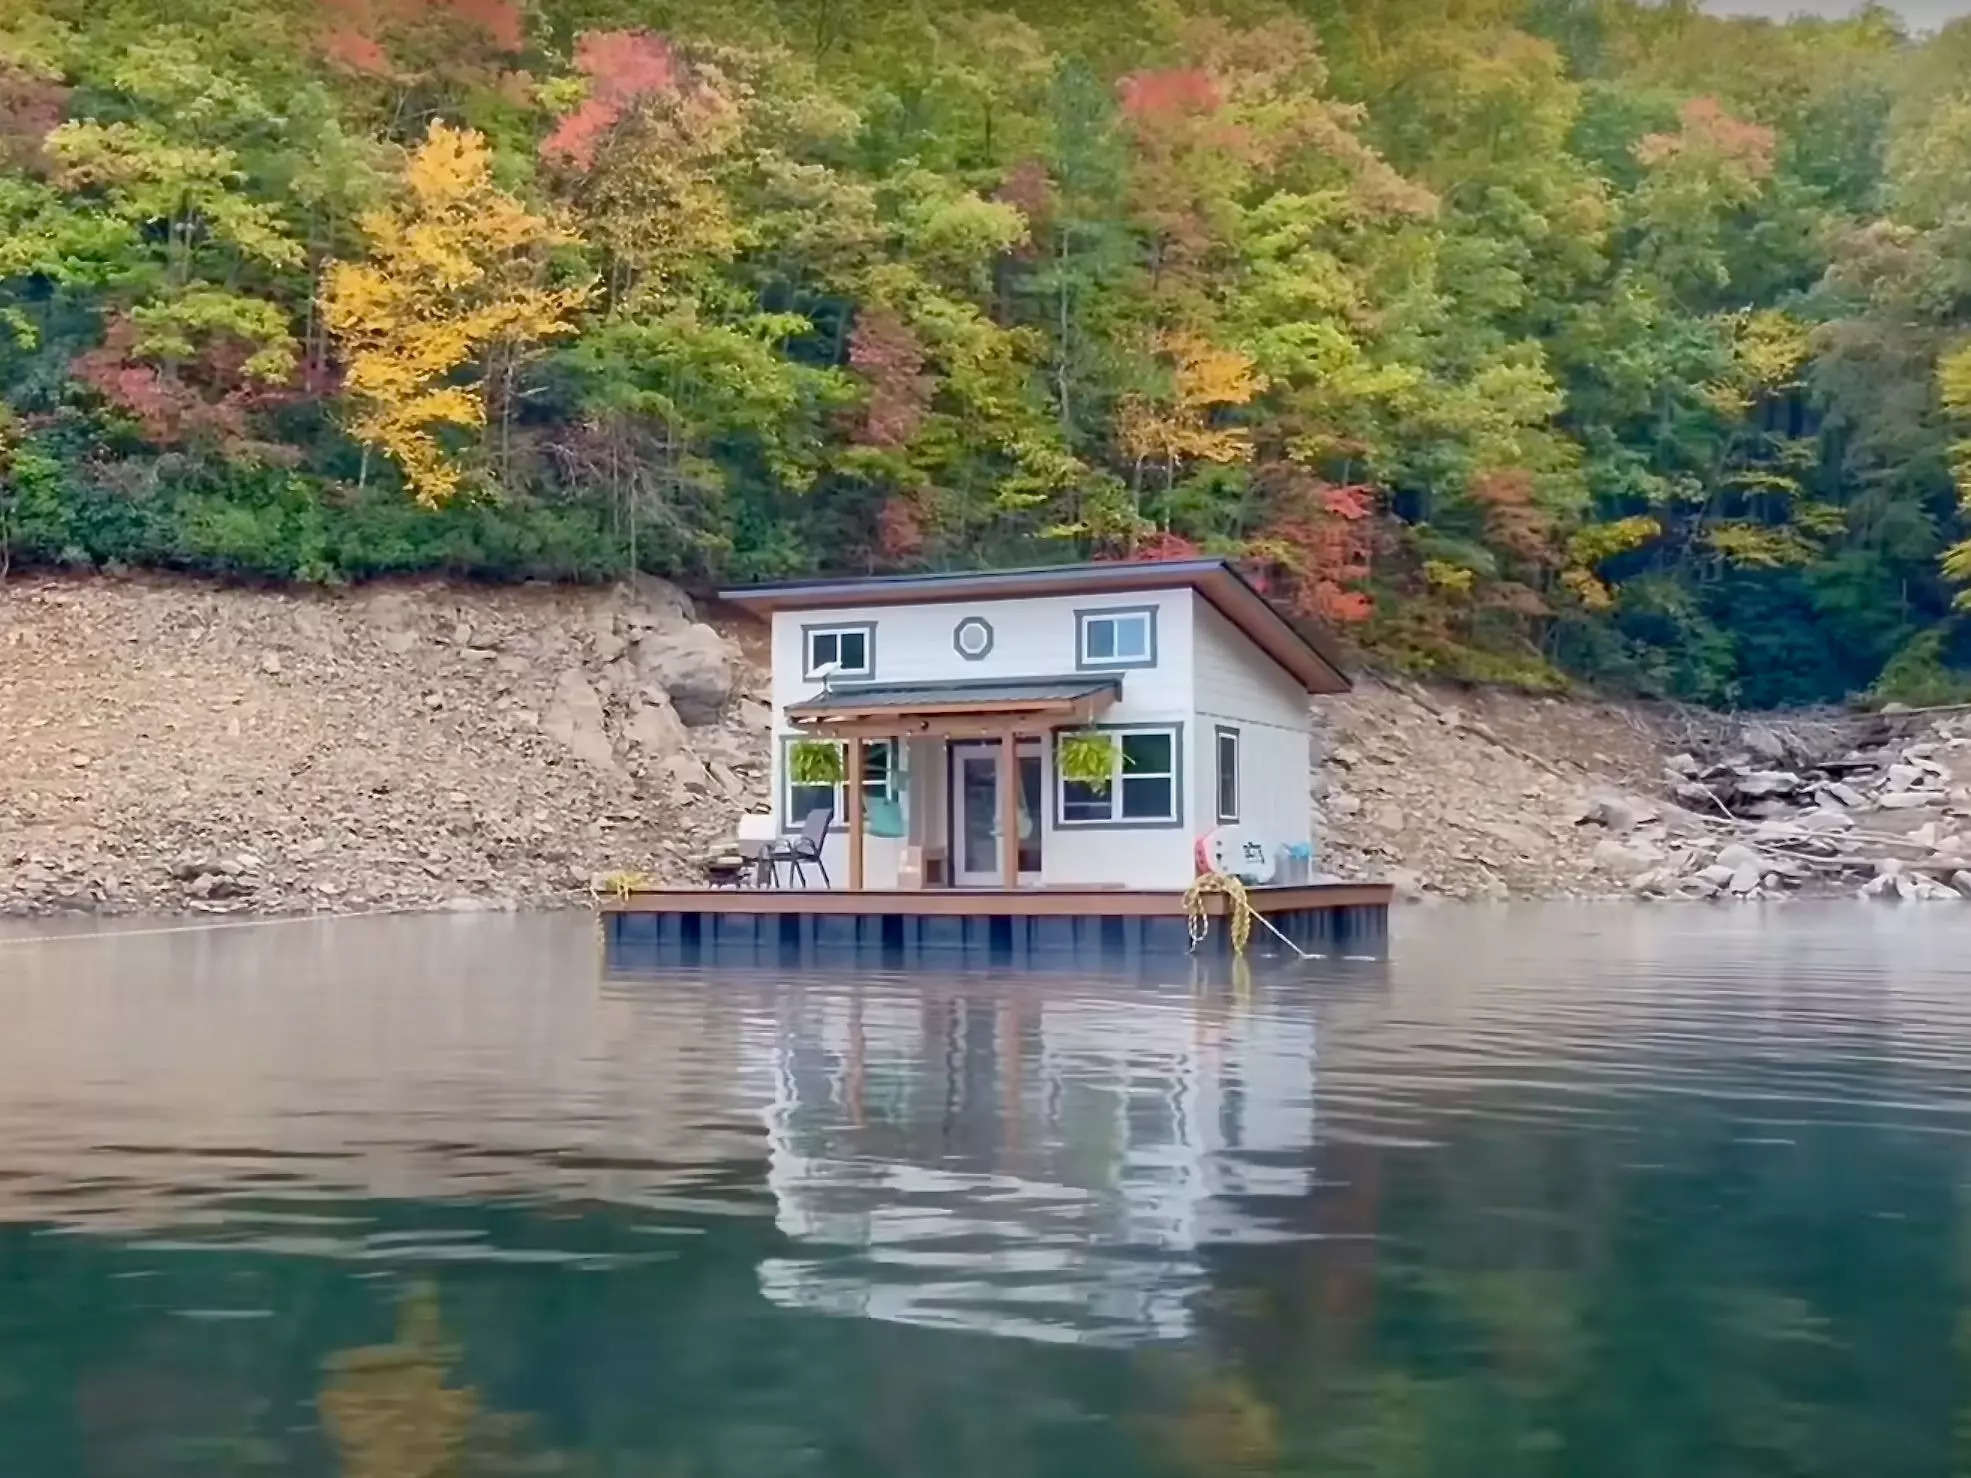 The couple built a floating home in the middle of a lake in North Carolina.